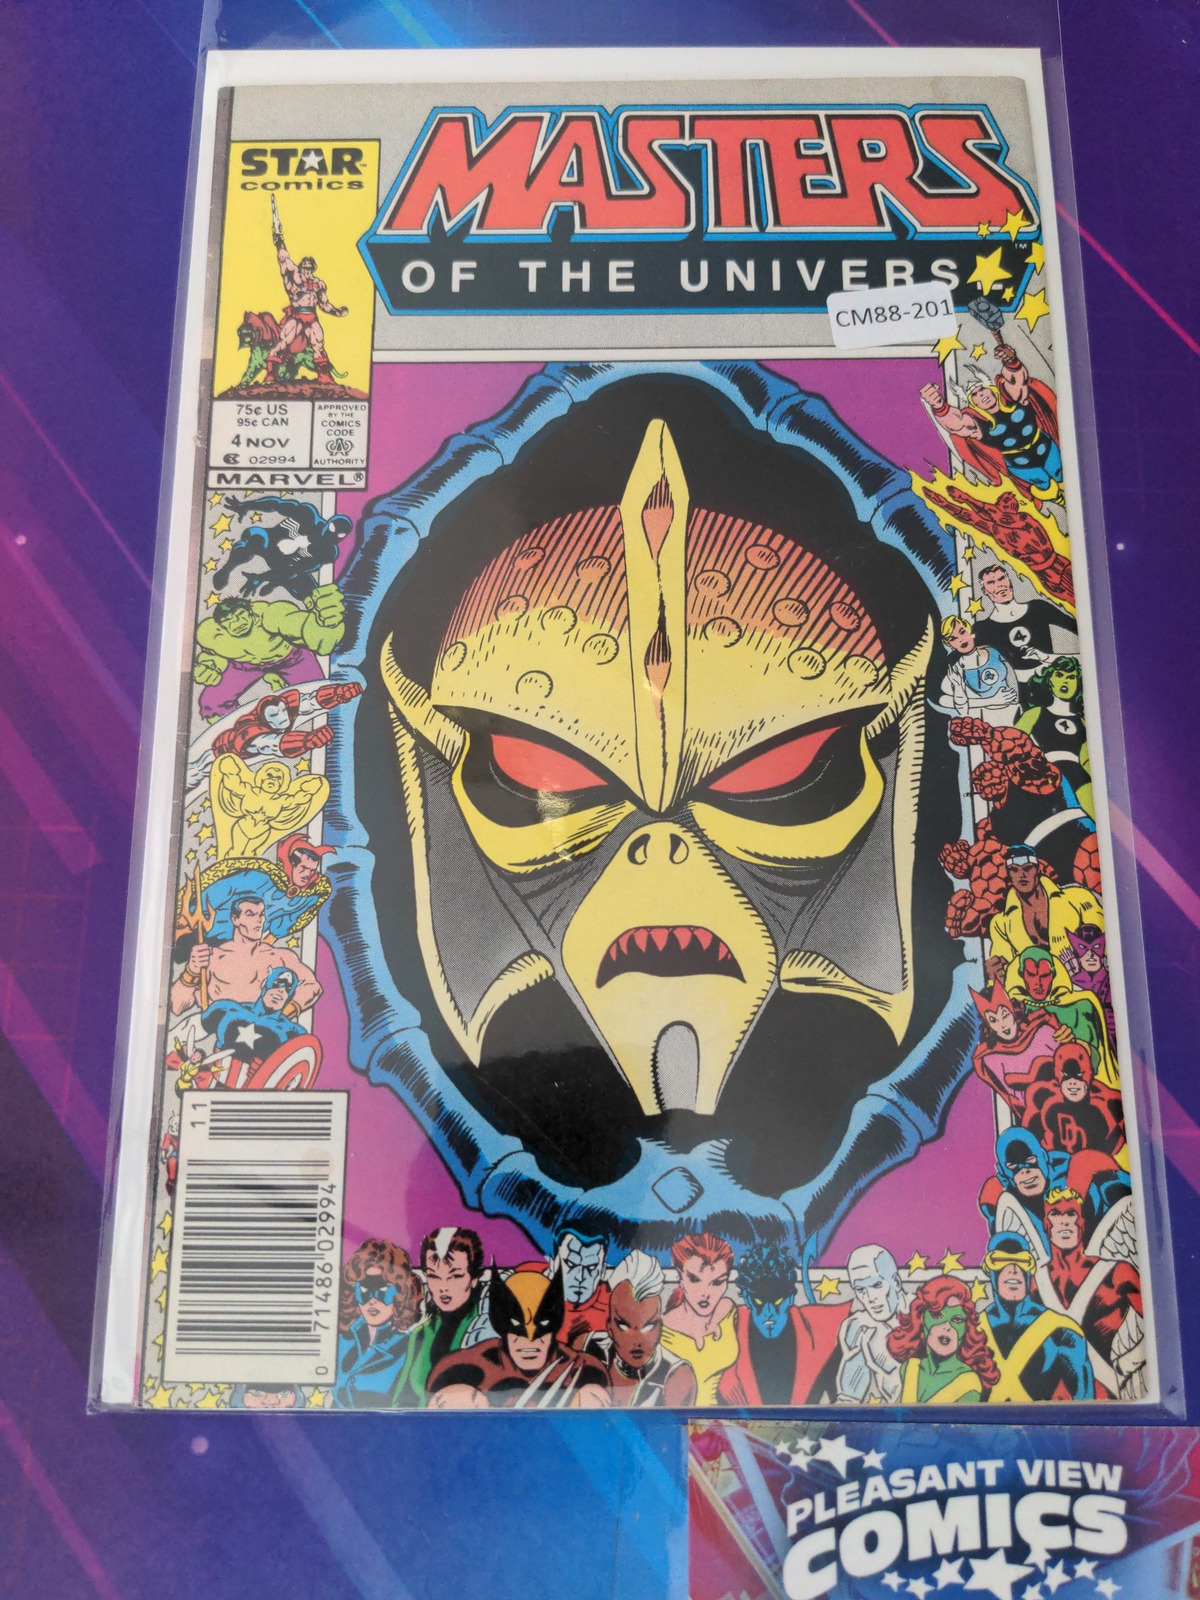 MASTERS OF THE UNIVERSE #4 VOL. 2 6.0 NEWSSTAND STAR COMIC BOOK CM88-201